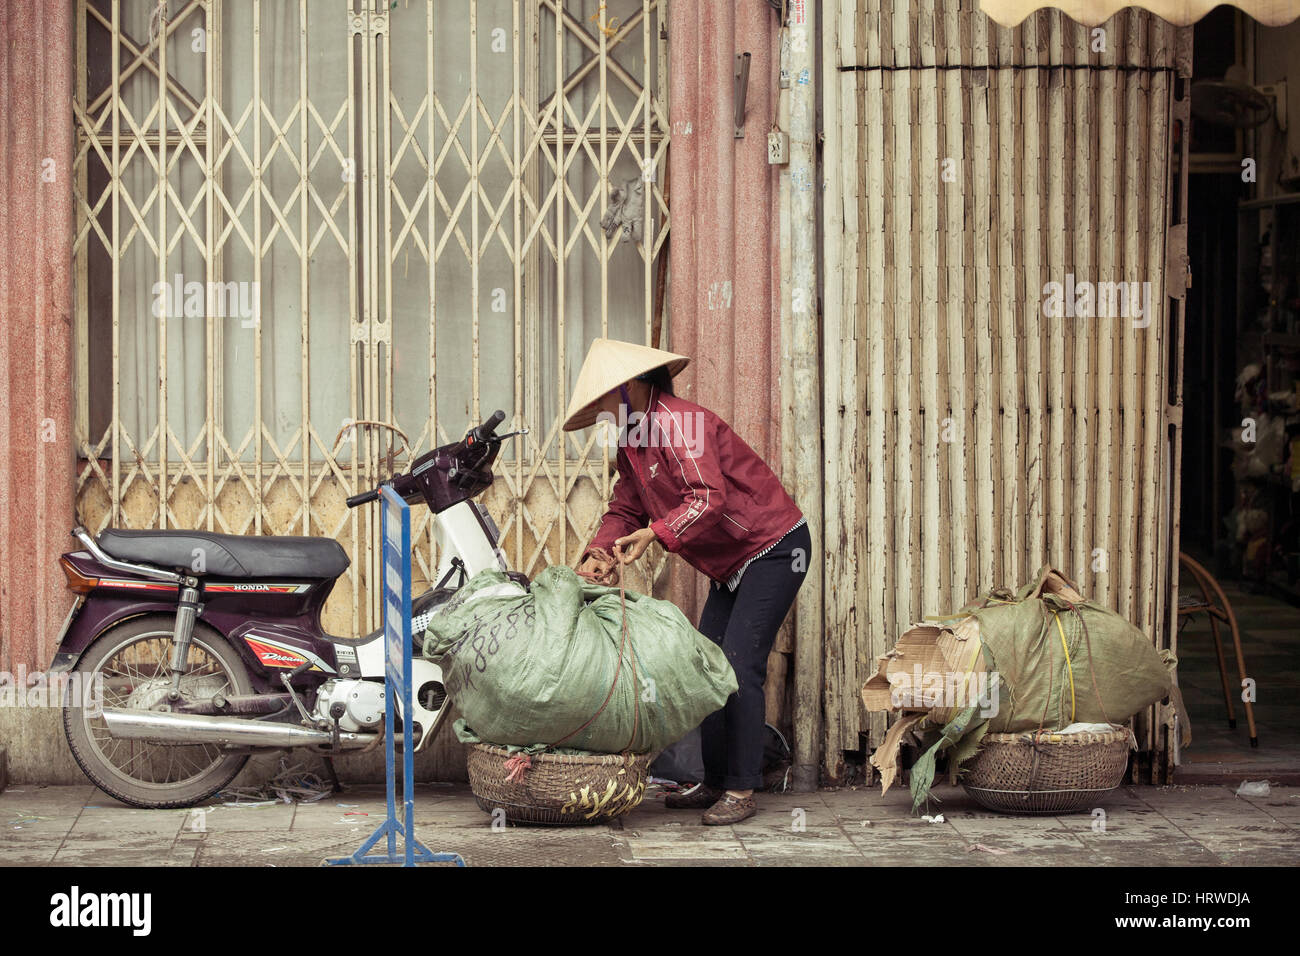 Hanoi, Vietnam - 3 MARCH: Women packing baskets with cardboard on the street of Hanoi, March 3, 2014. Stock Photo